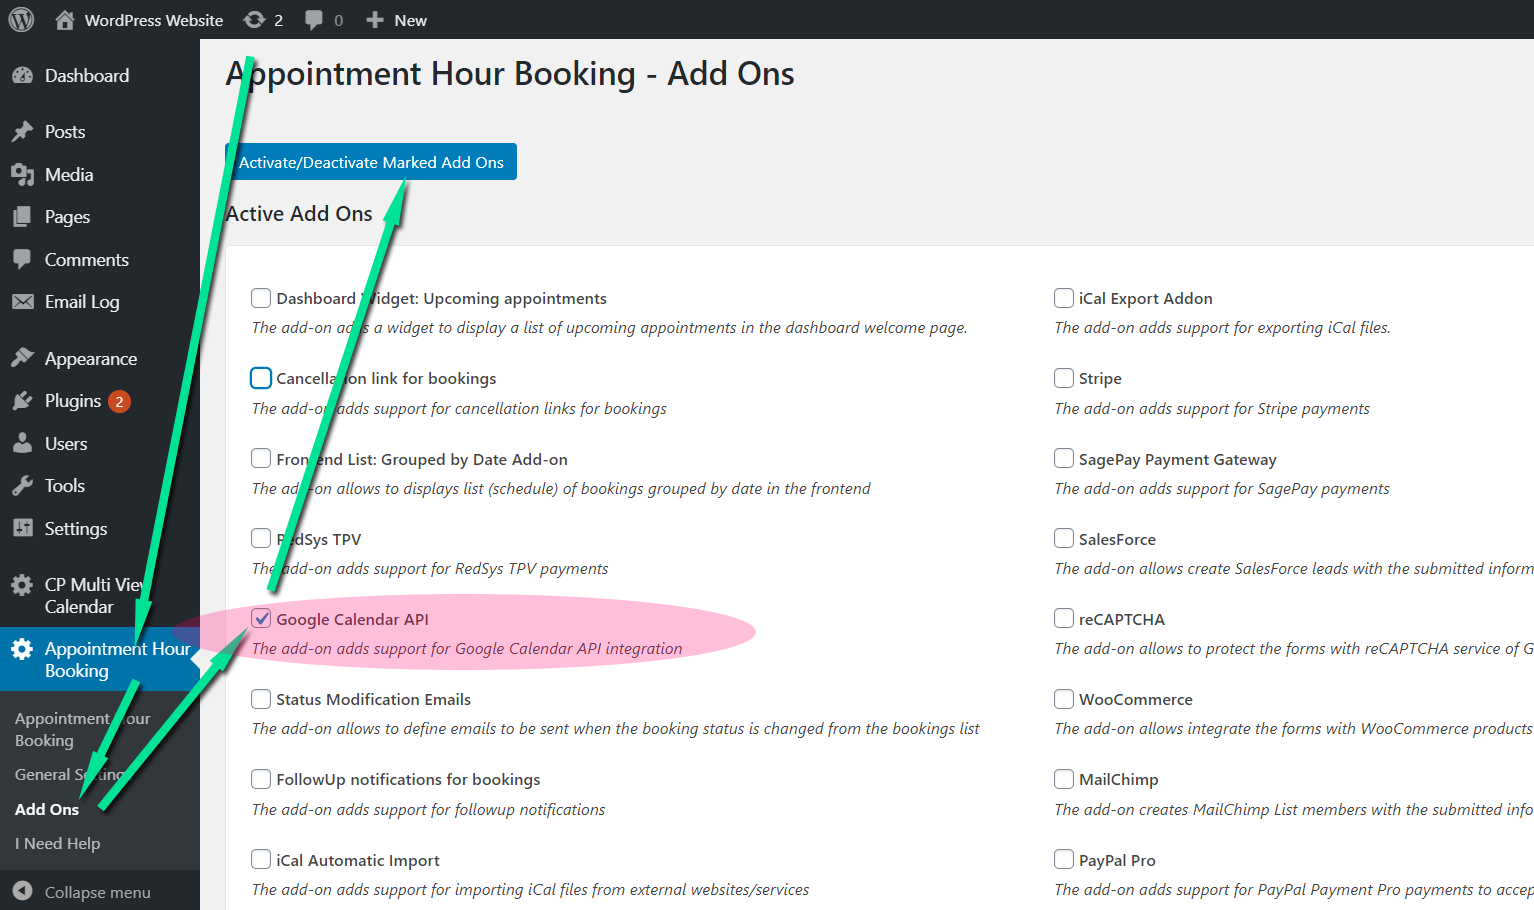 Setup of the Google Calendar API add on Appointment Hour Booking